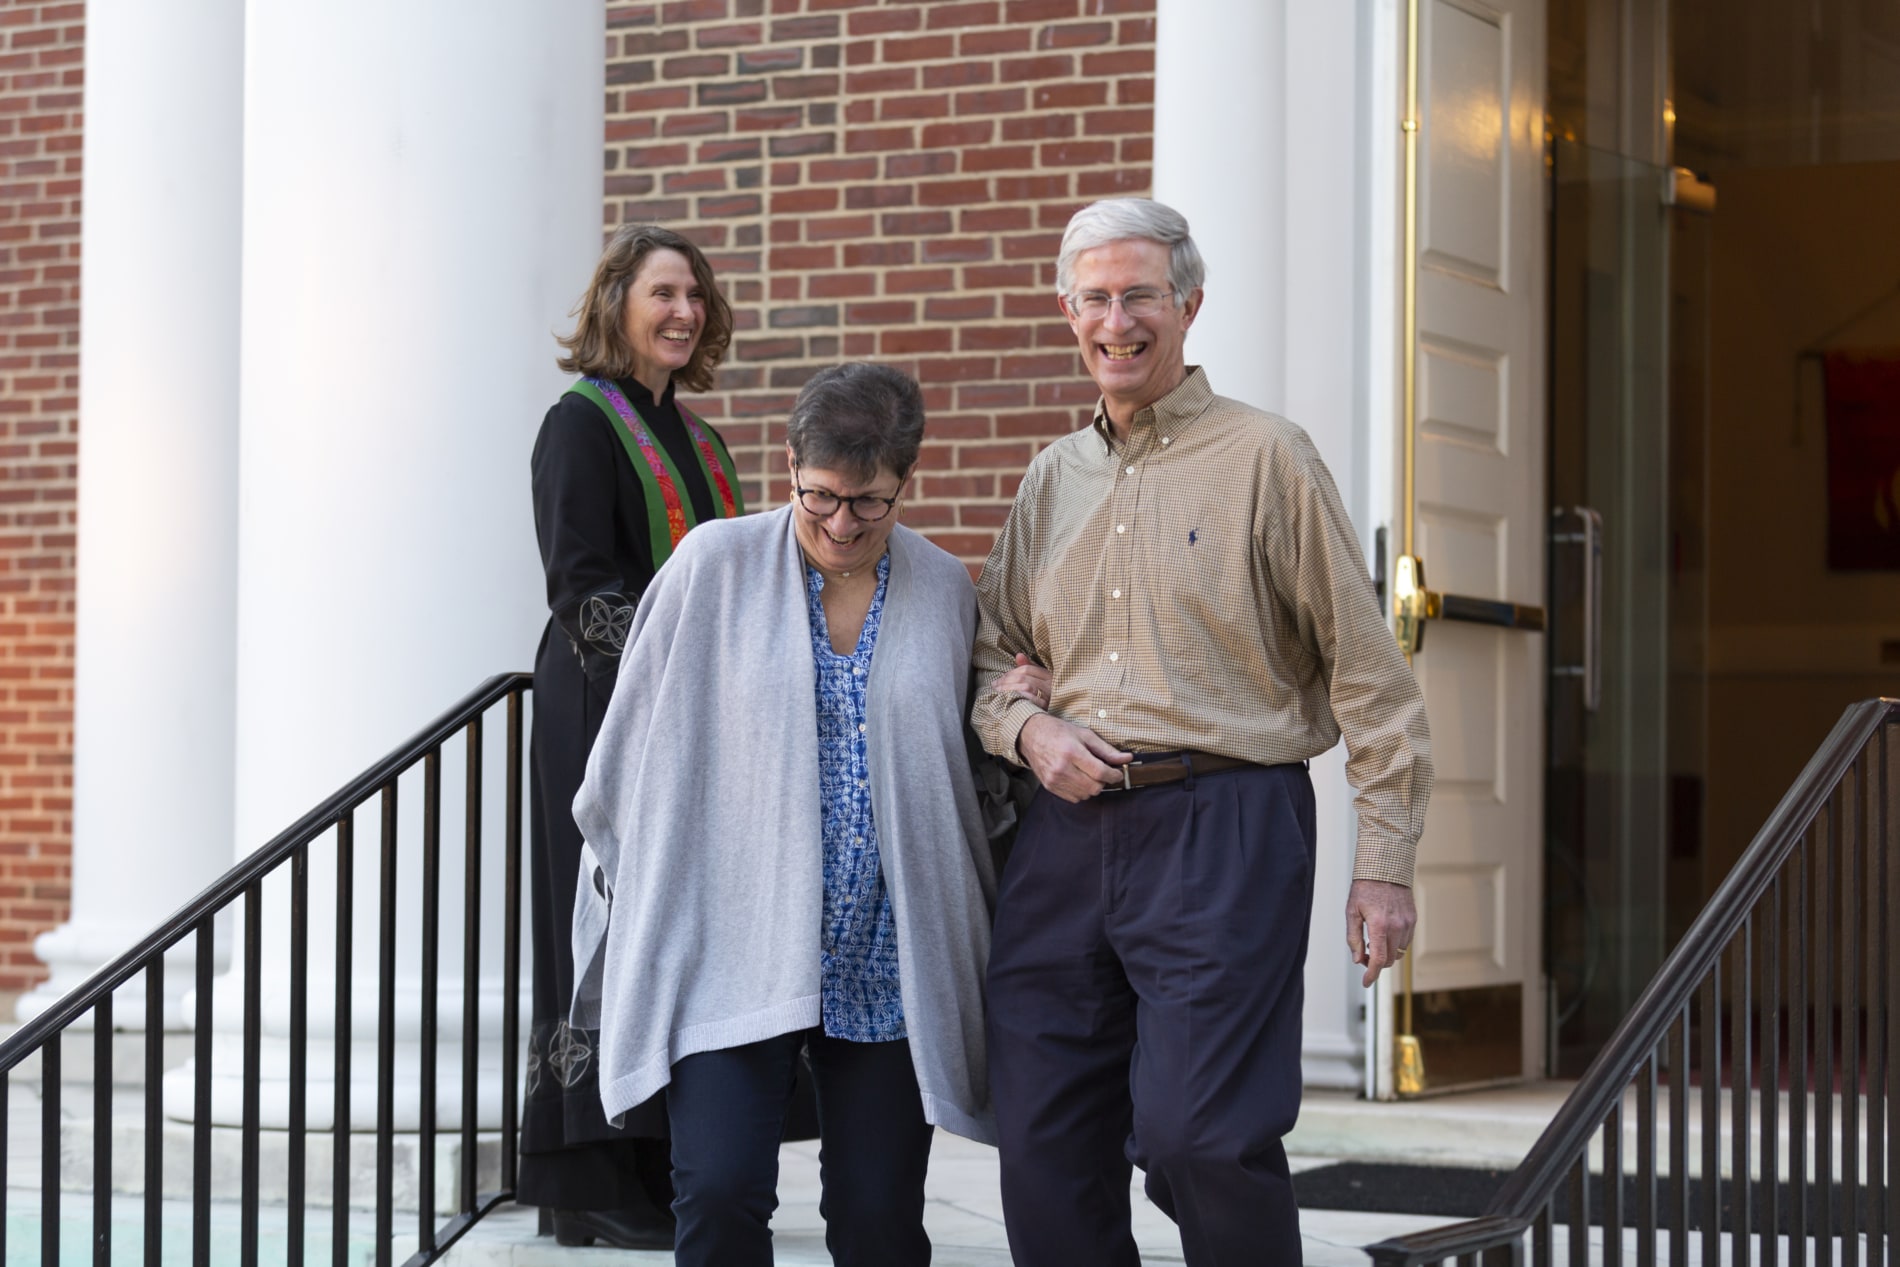 A smiling couple descends the stairs of the church while a pastor looks on